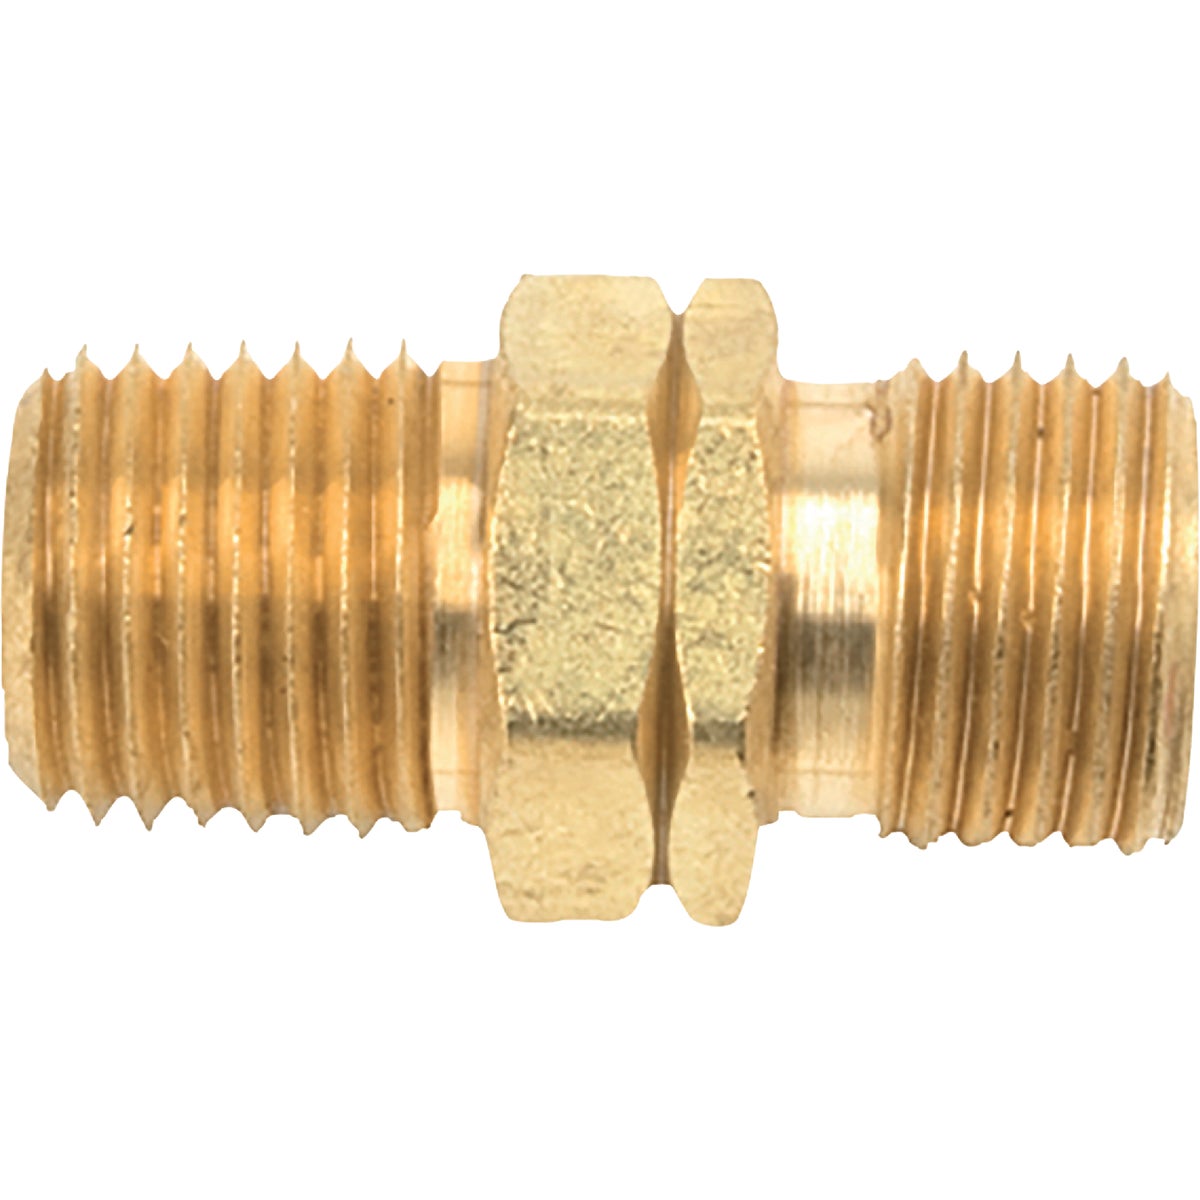 Item 424978, Secure wrench tightened durable brass fitting used to help quickly adapt 